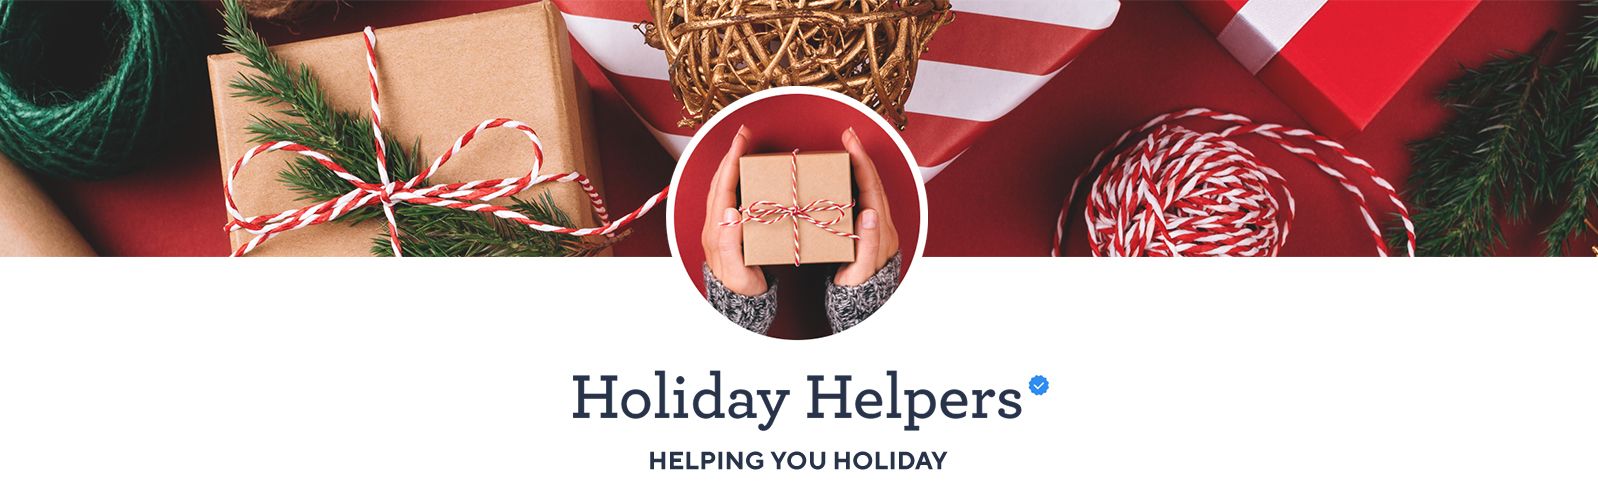 Holiday Helpers. Helping You Holiday